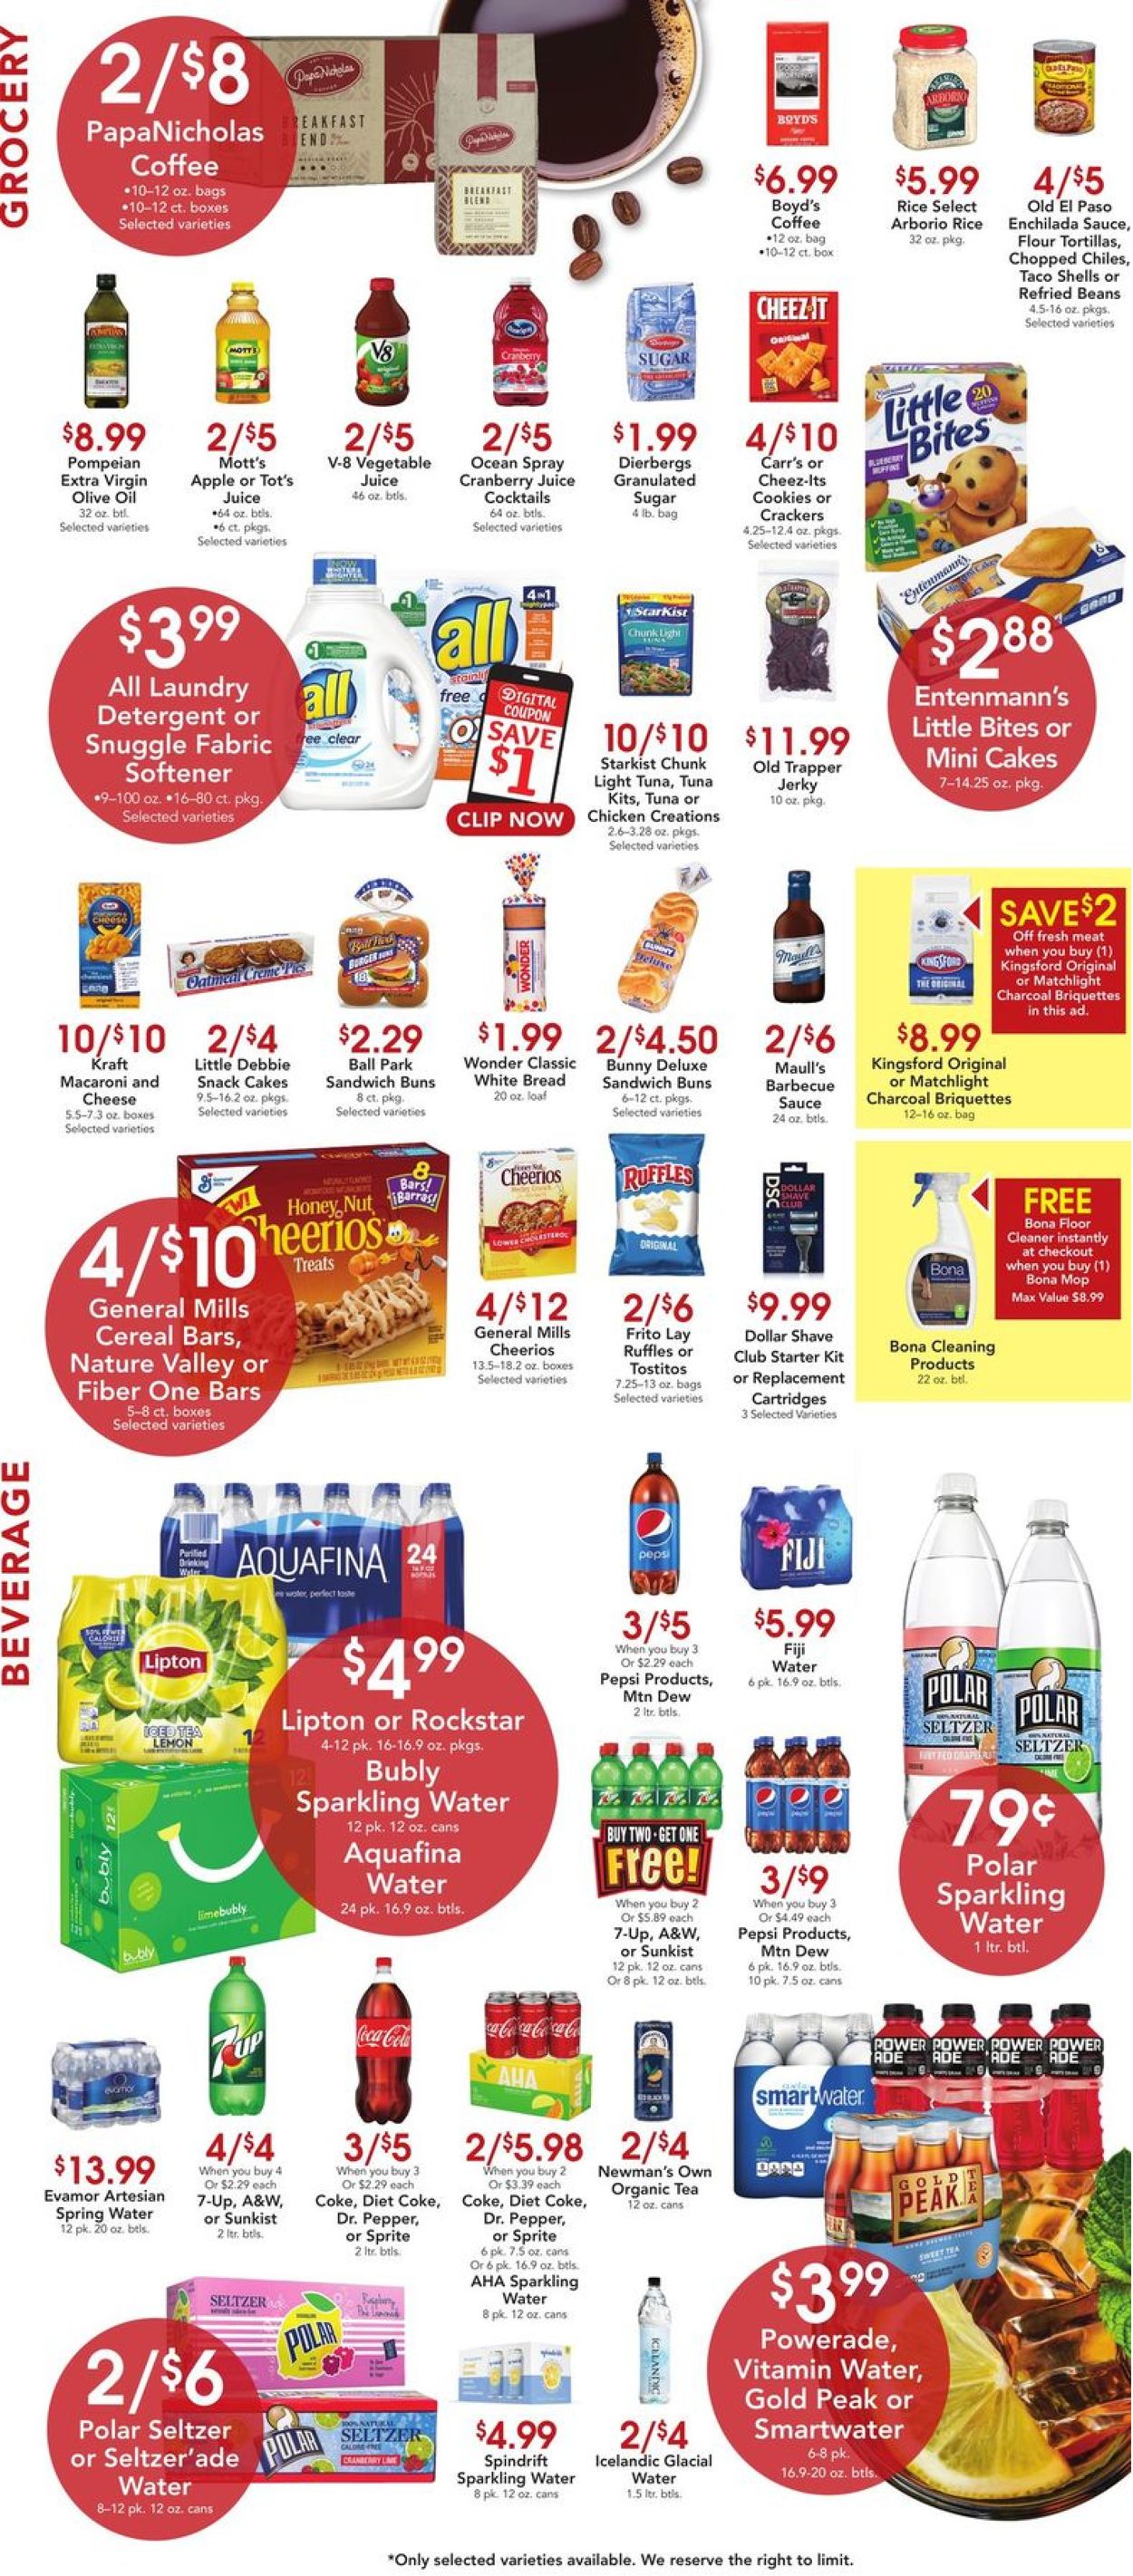 Catalogue Dierbergs from 06/15/2021